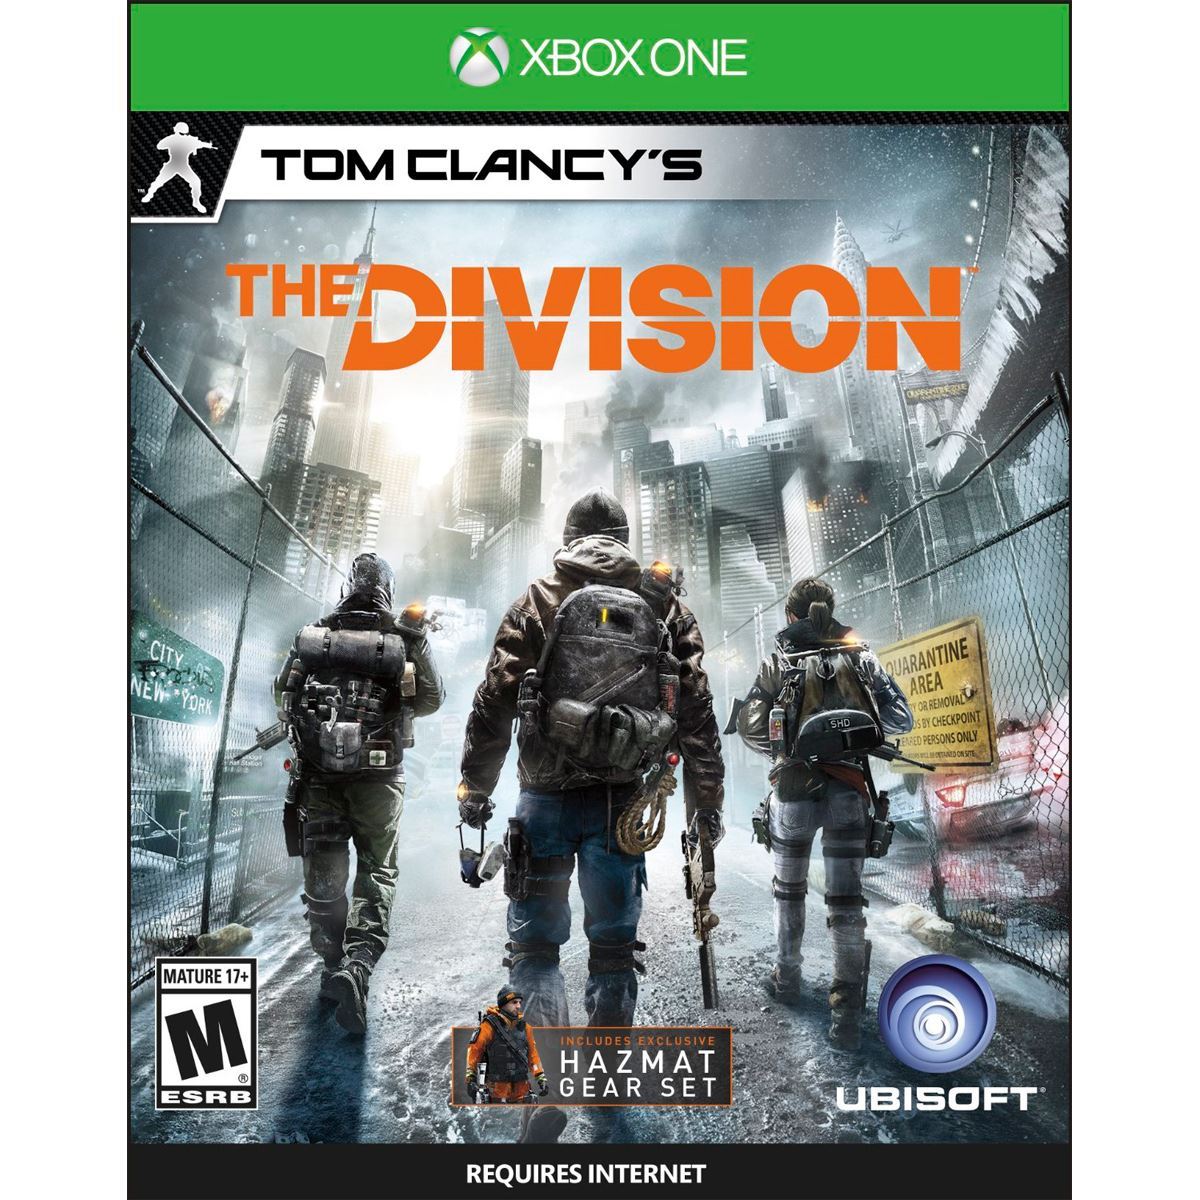 Consola Xbox One 1TB The Division